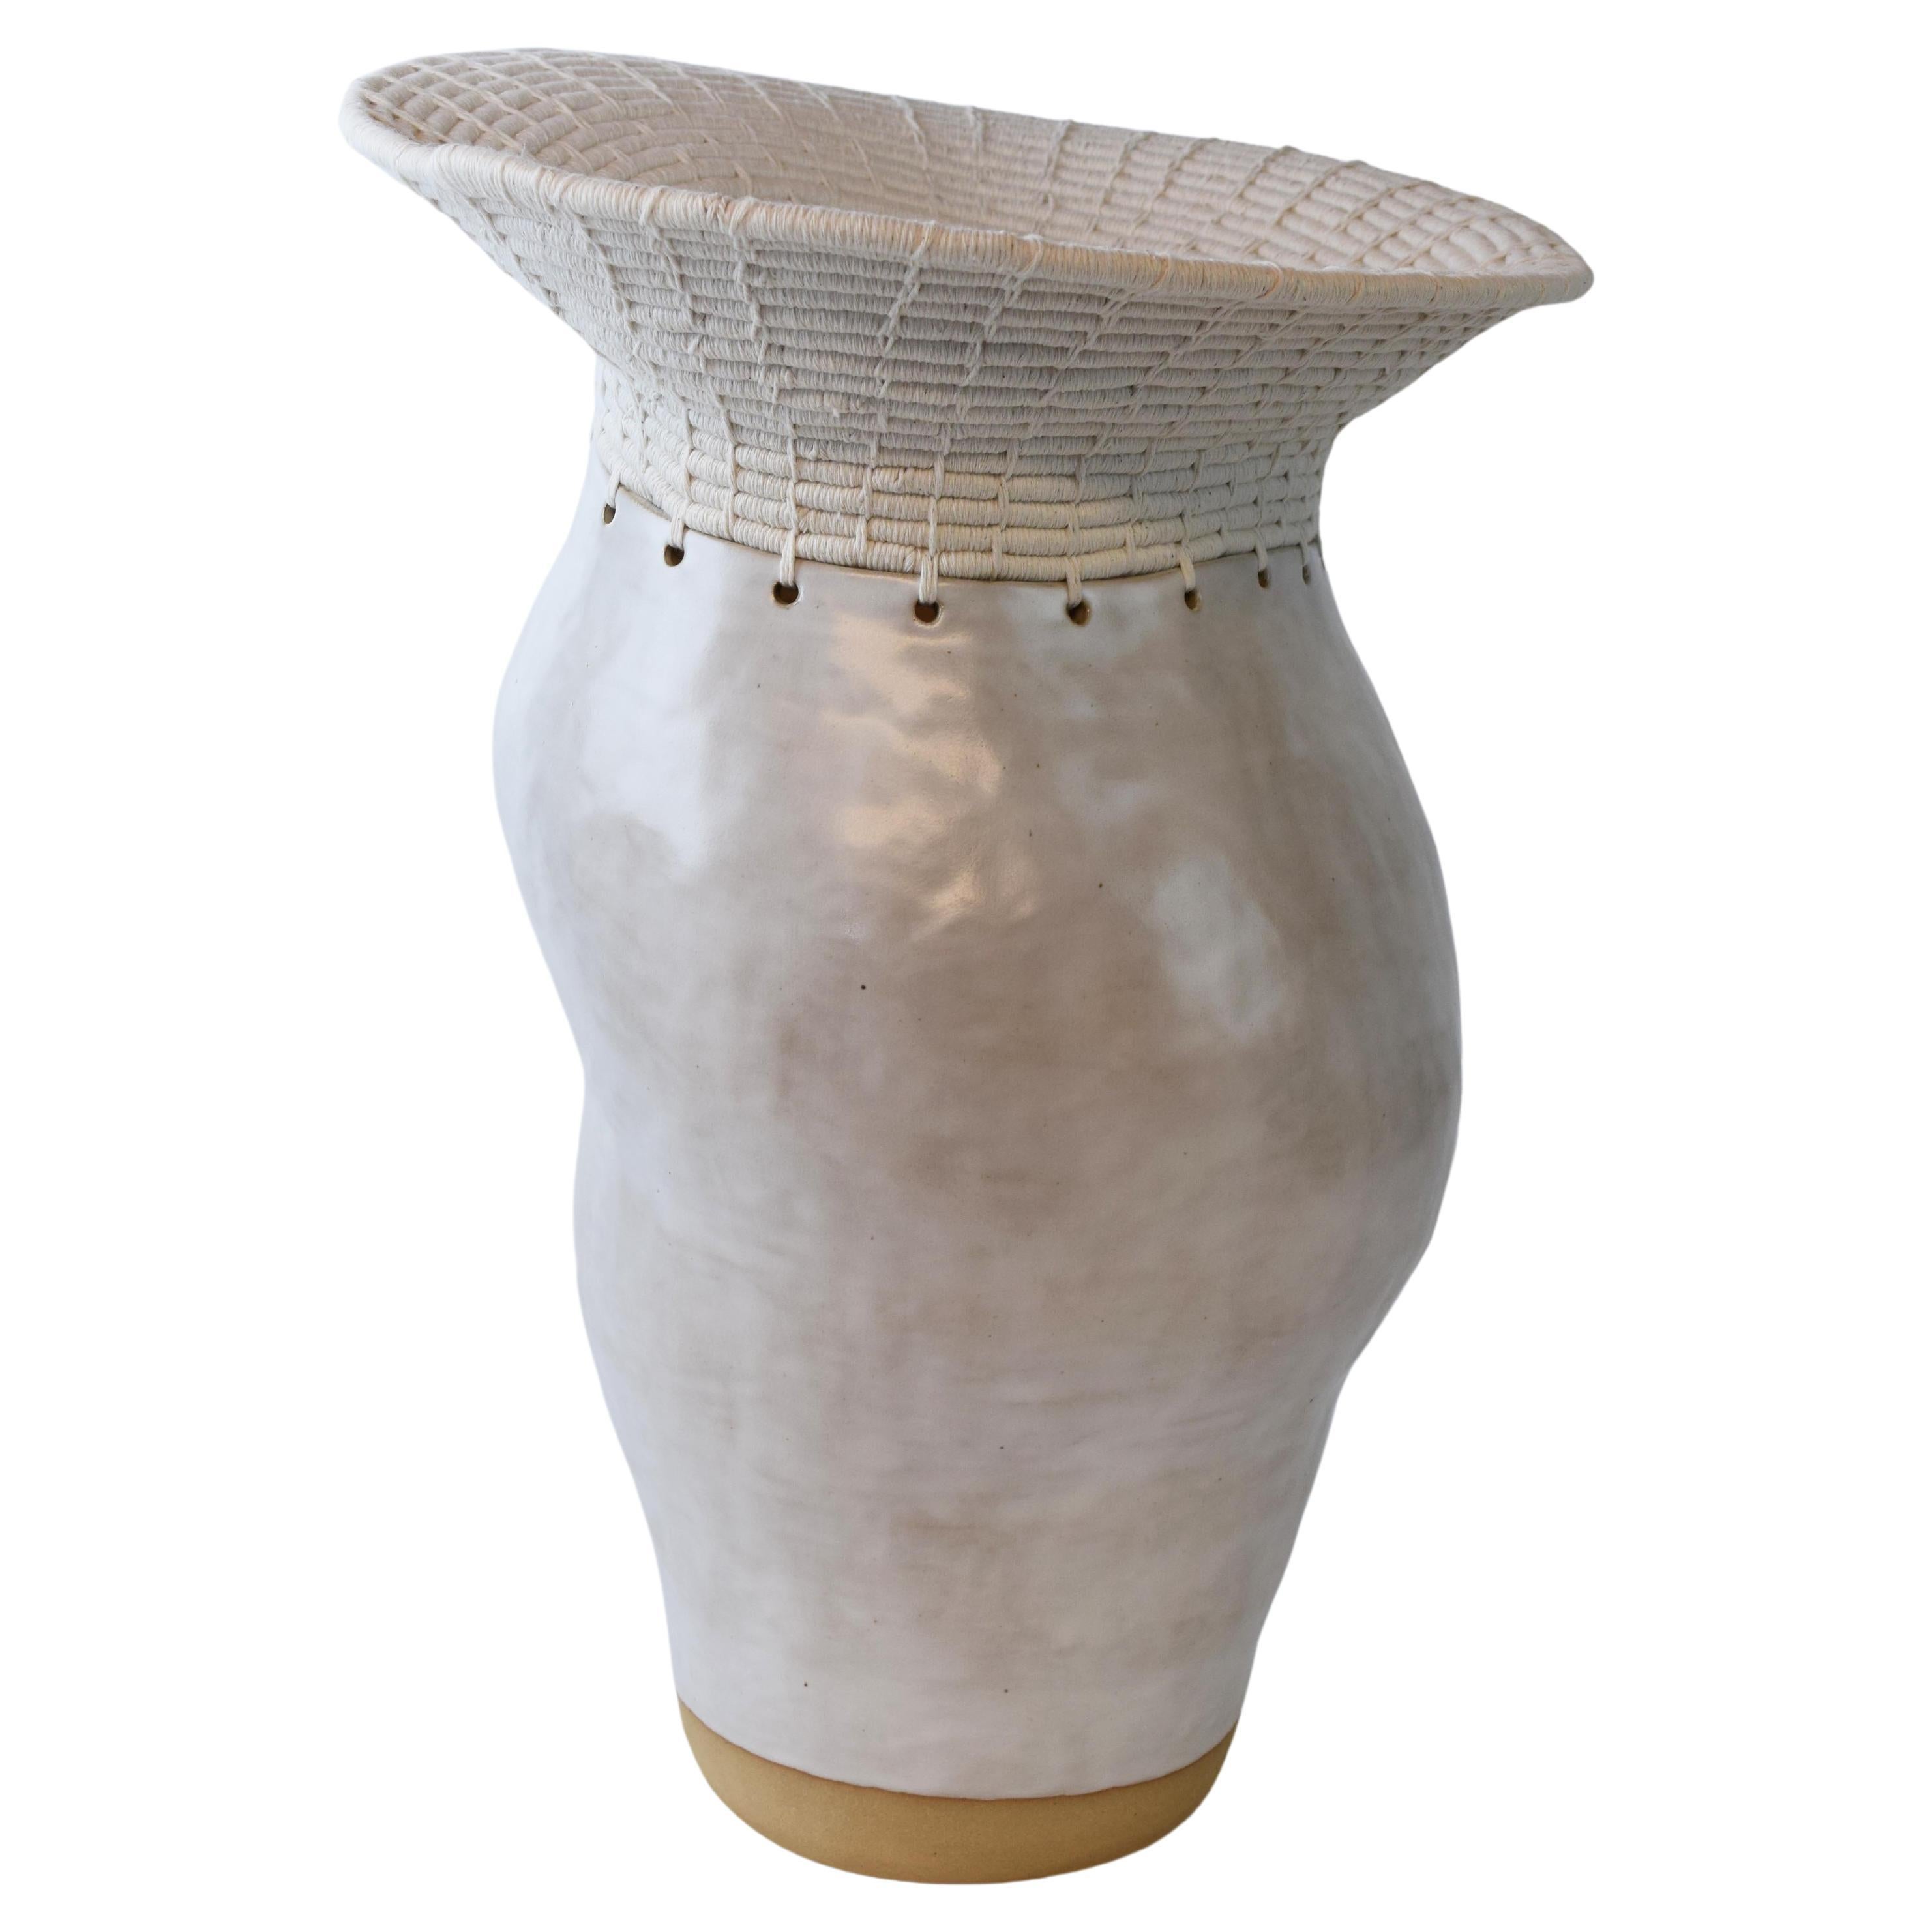 One of a Kind Asymmetrical Ceramic Vessel #771, White Glaze and Woven Cotton For Sale